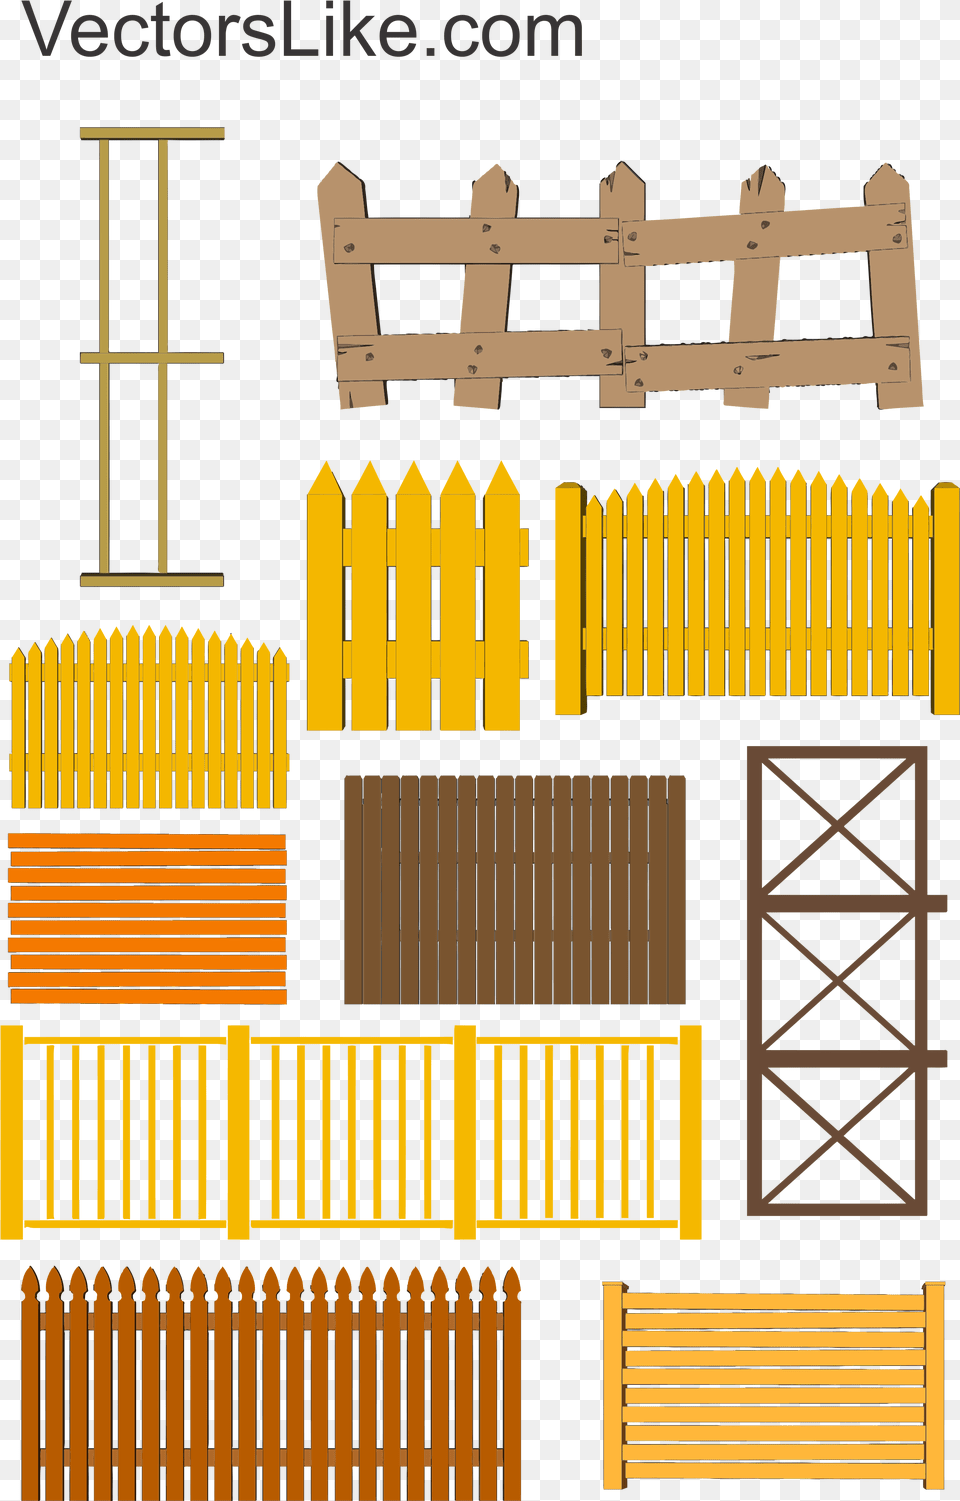 Wooden Fence Vector Vectors Like, Gate, Picket Free Png Download